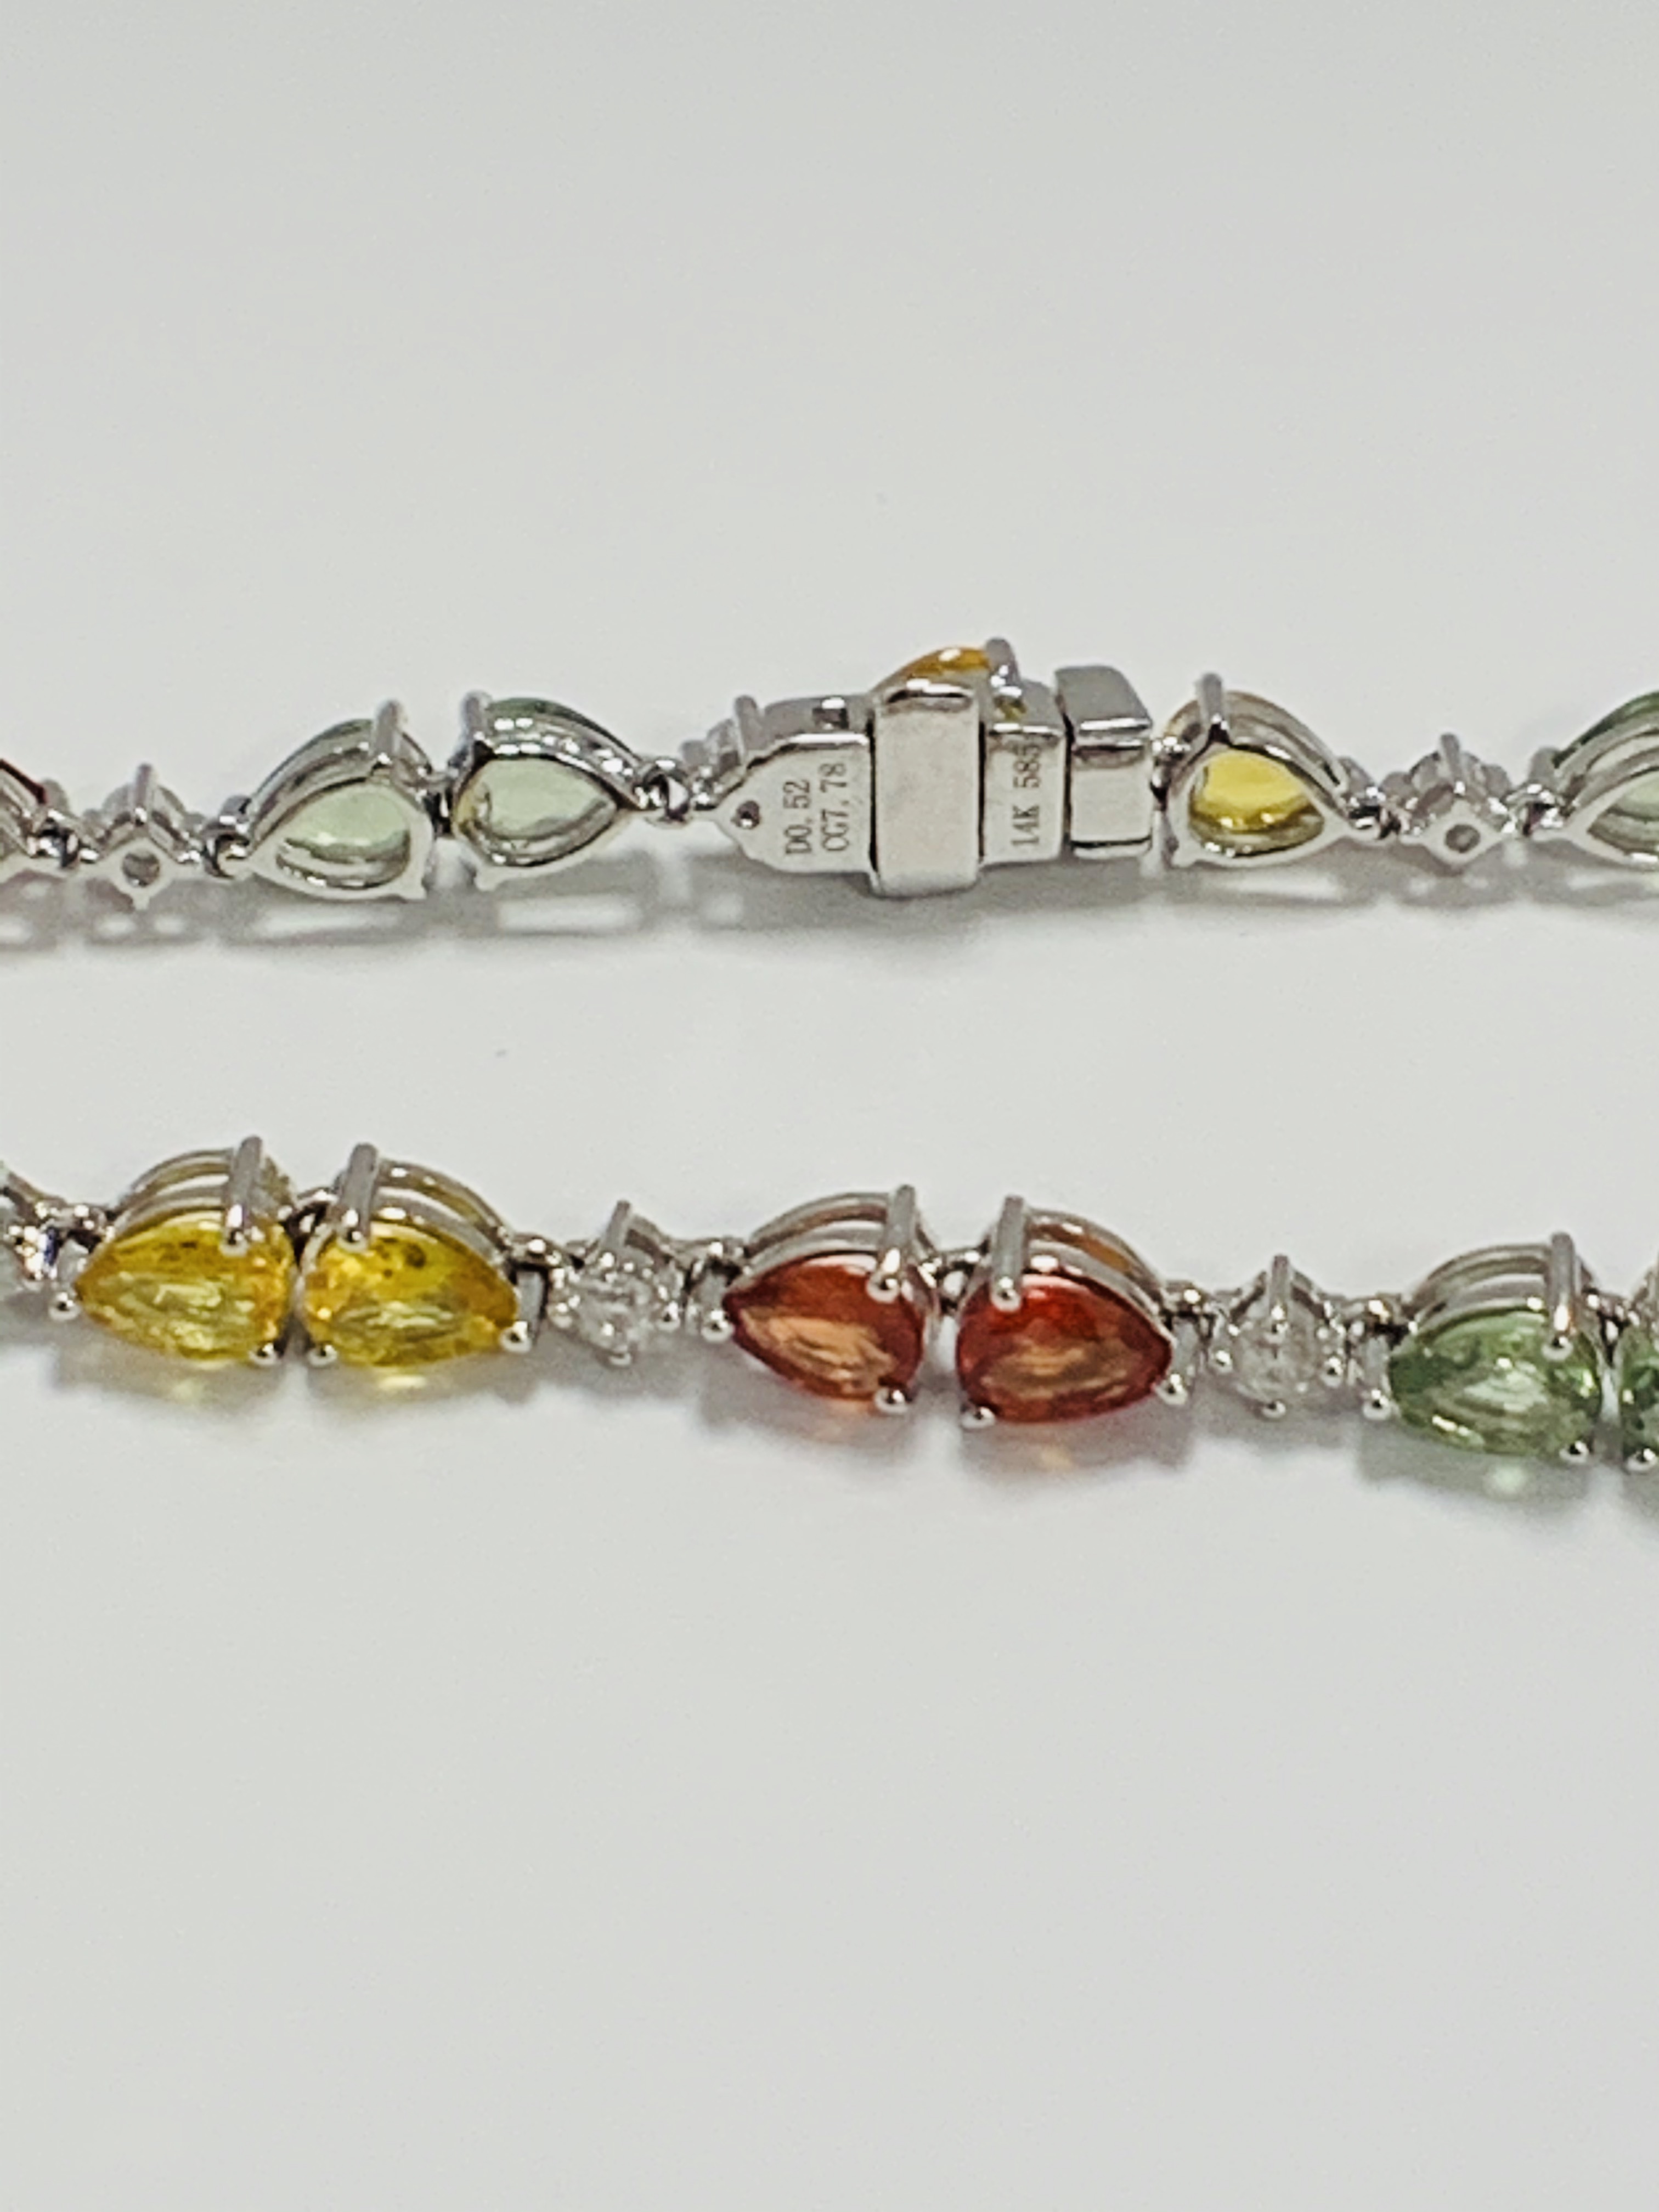 14ct White Gold Sapphire and Diamond bracelet featuring, 22 pear cut, yellow, green and orange Sapph - Image 12 of 24